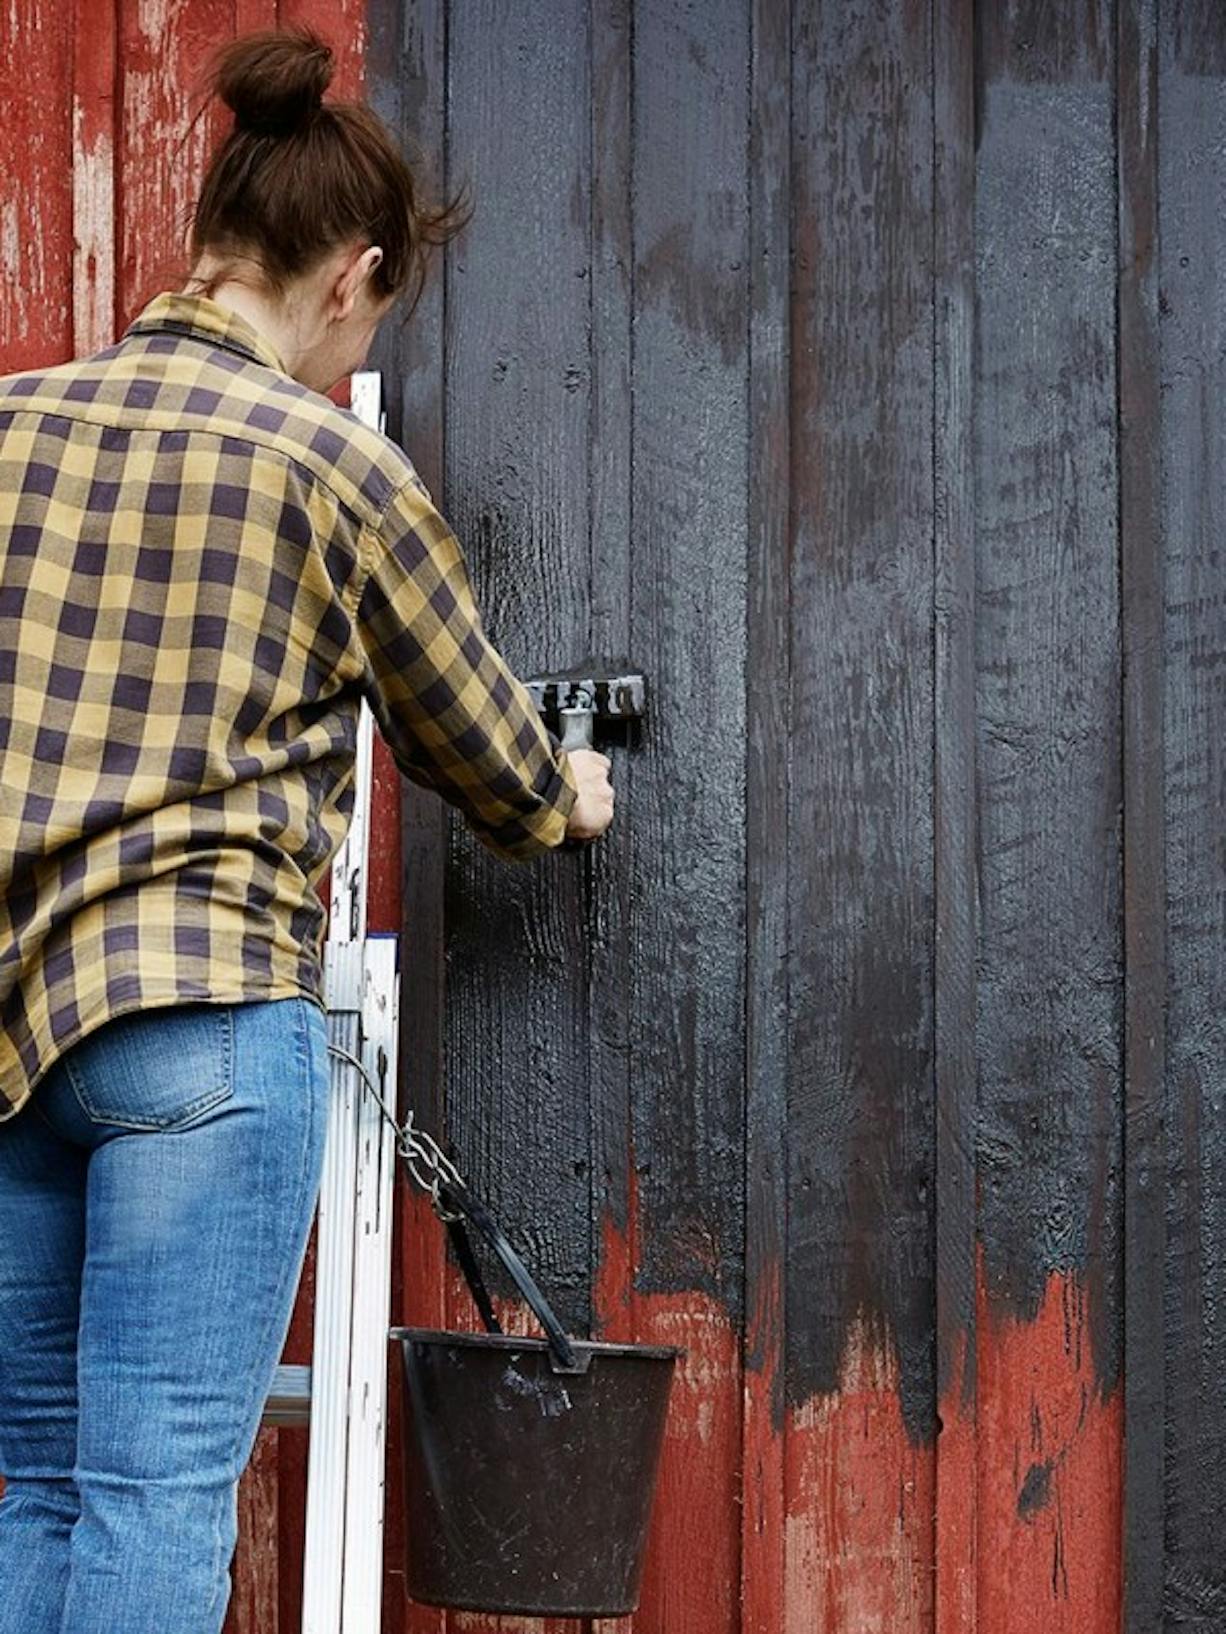 Exterior Wooden Walls Protection Black Paint action Image